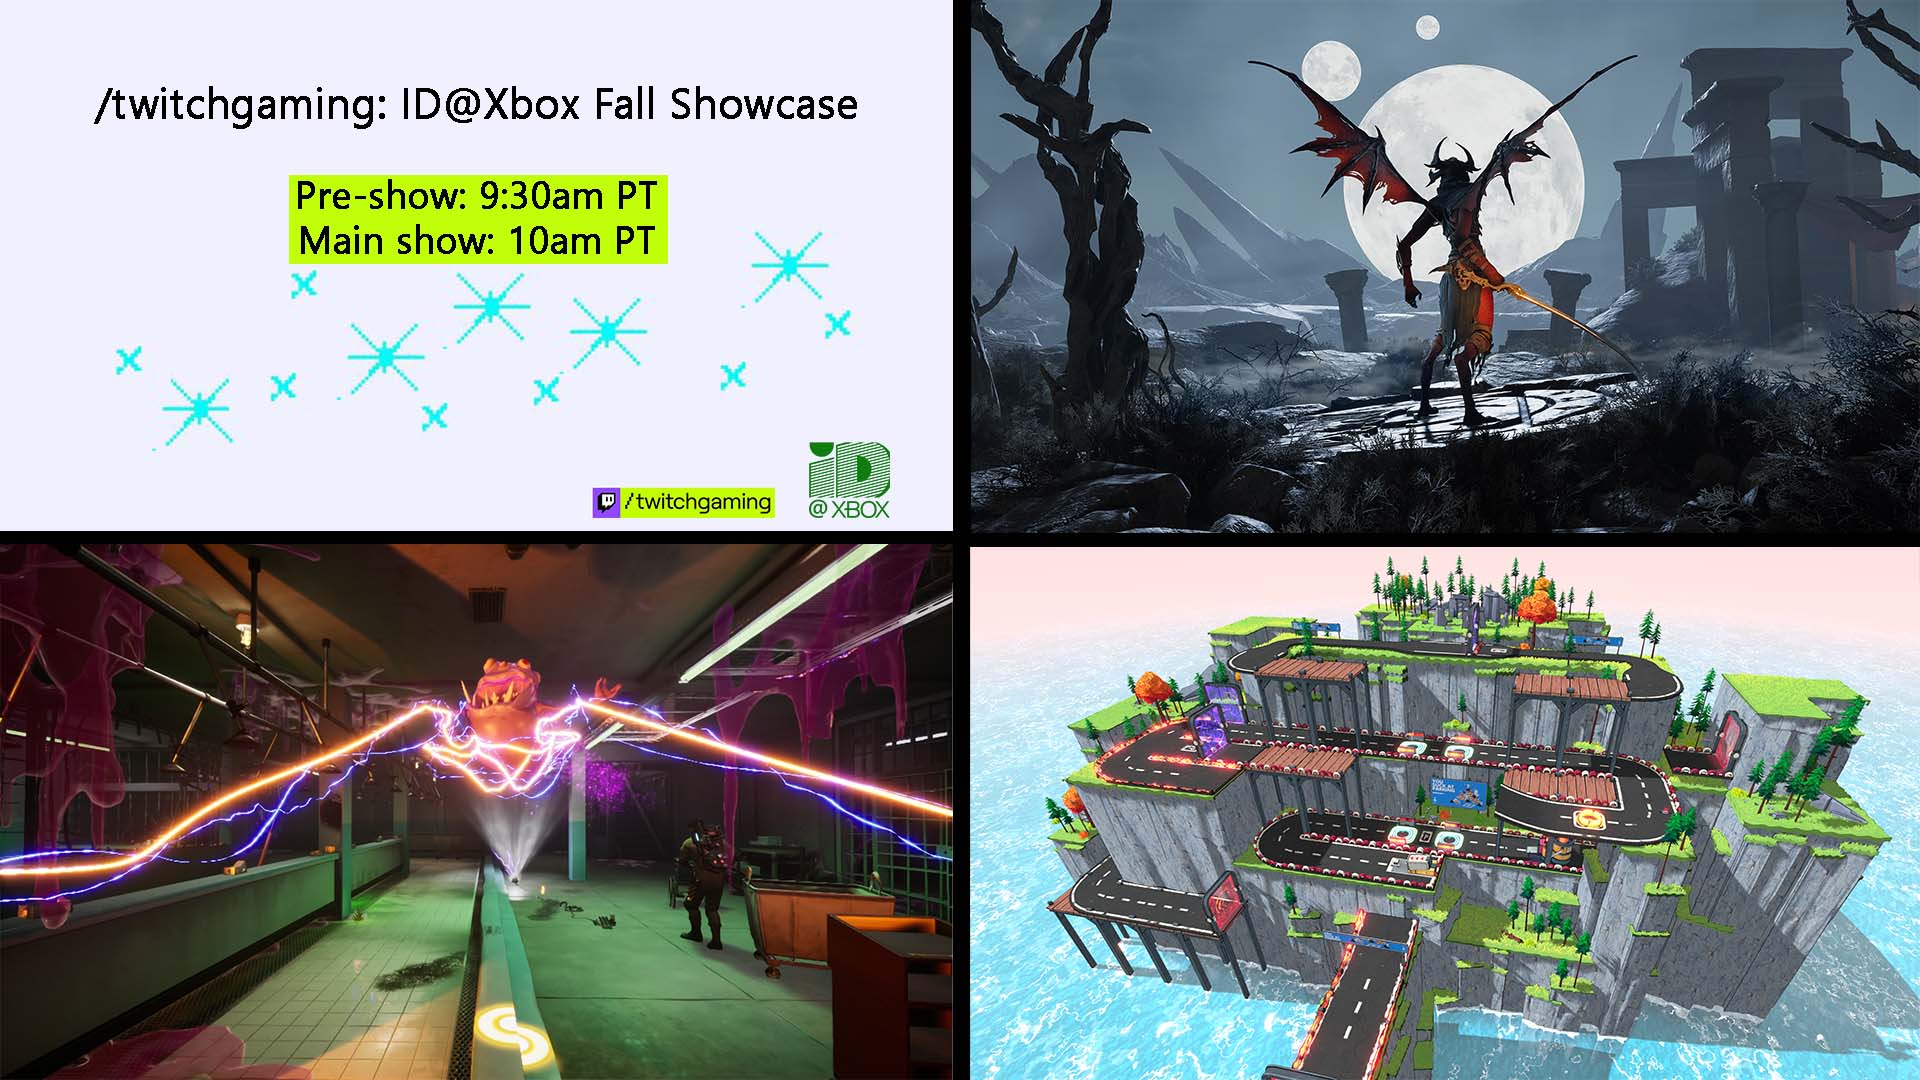 Don’t Miss the /twitchgaming: ID@Xbox Fall Showcase